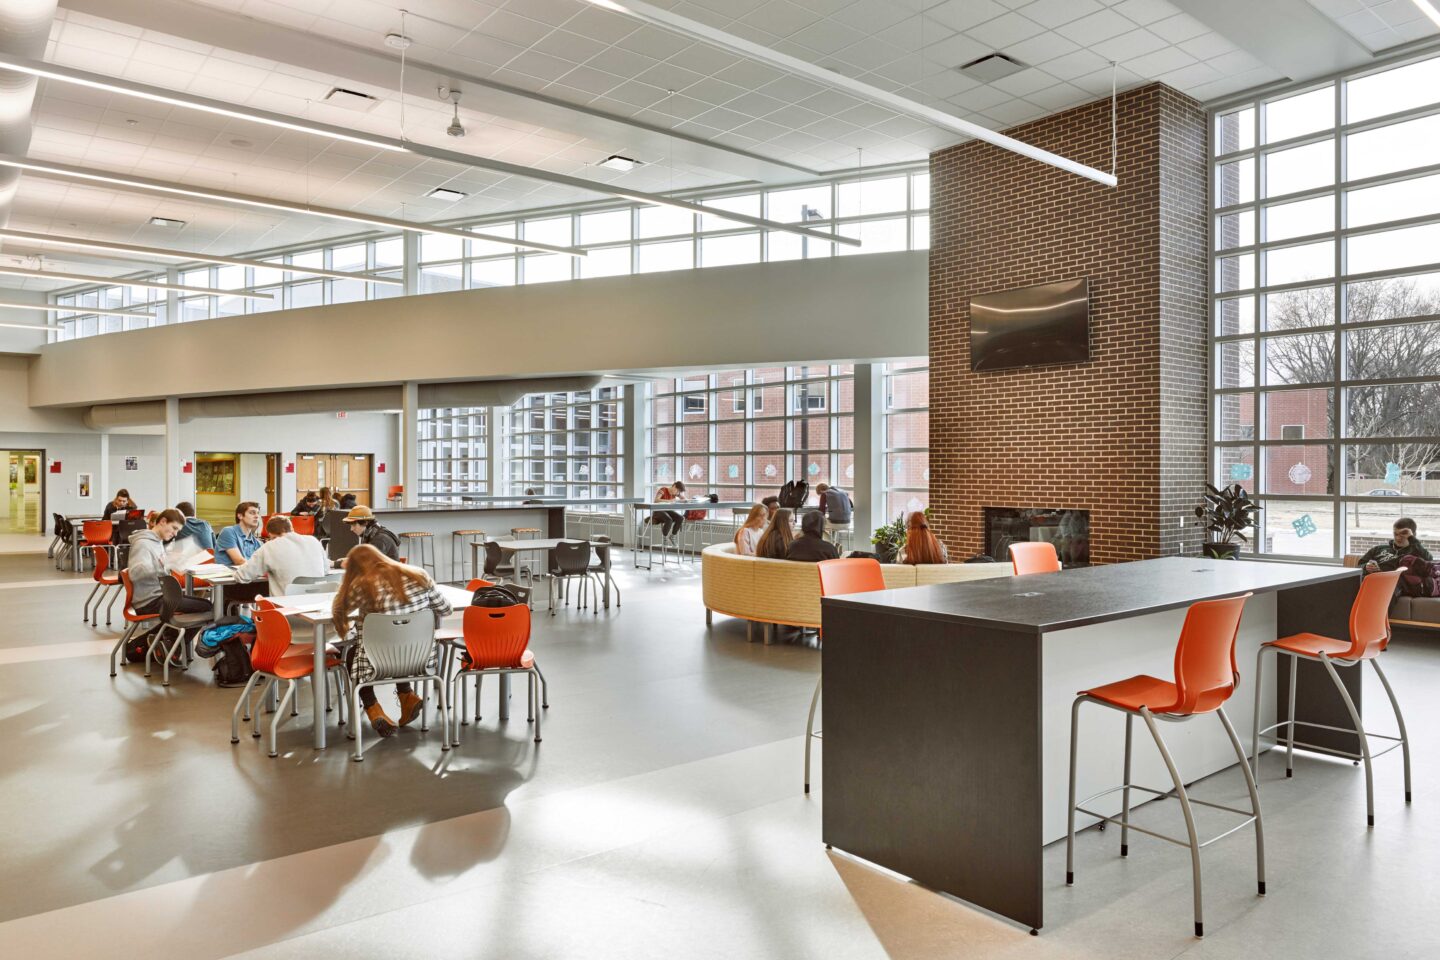 A view of students together in the lounge seating area near the cafeteria, which features large windows for ample daylight